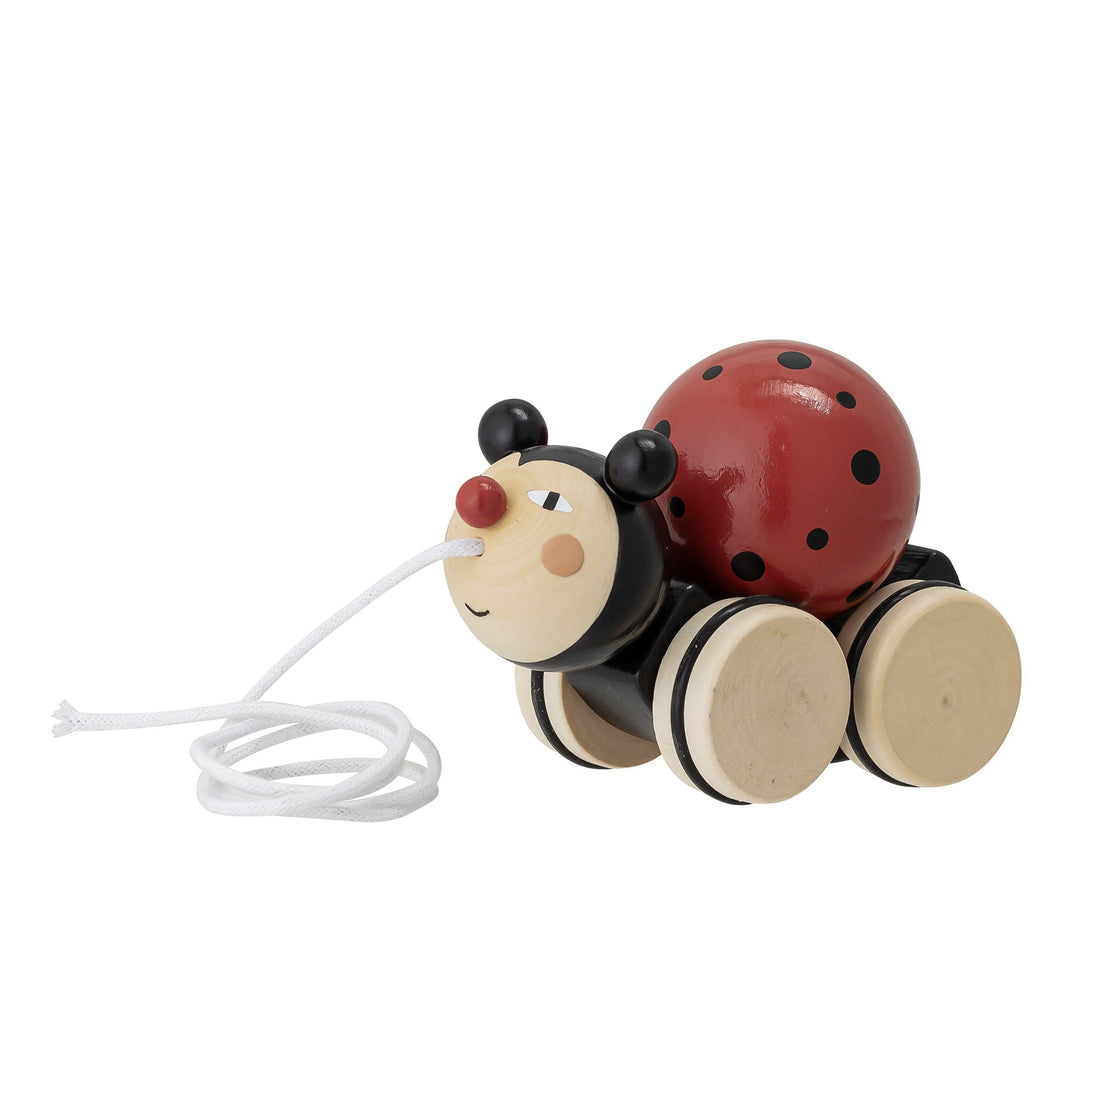 bloomingville-beetle-pull-along-toy- (1)